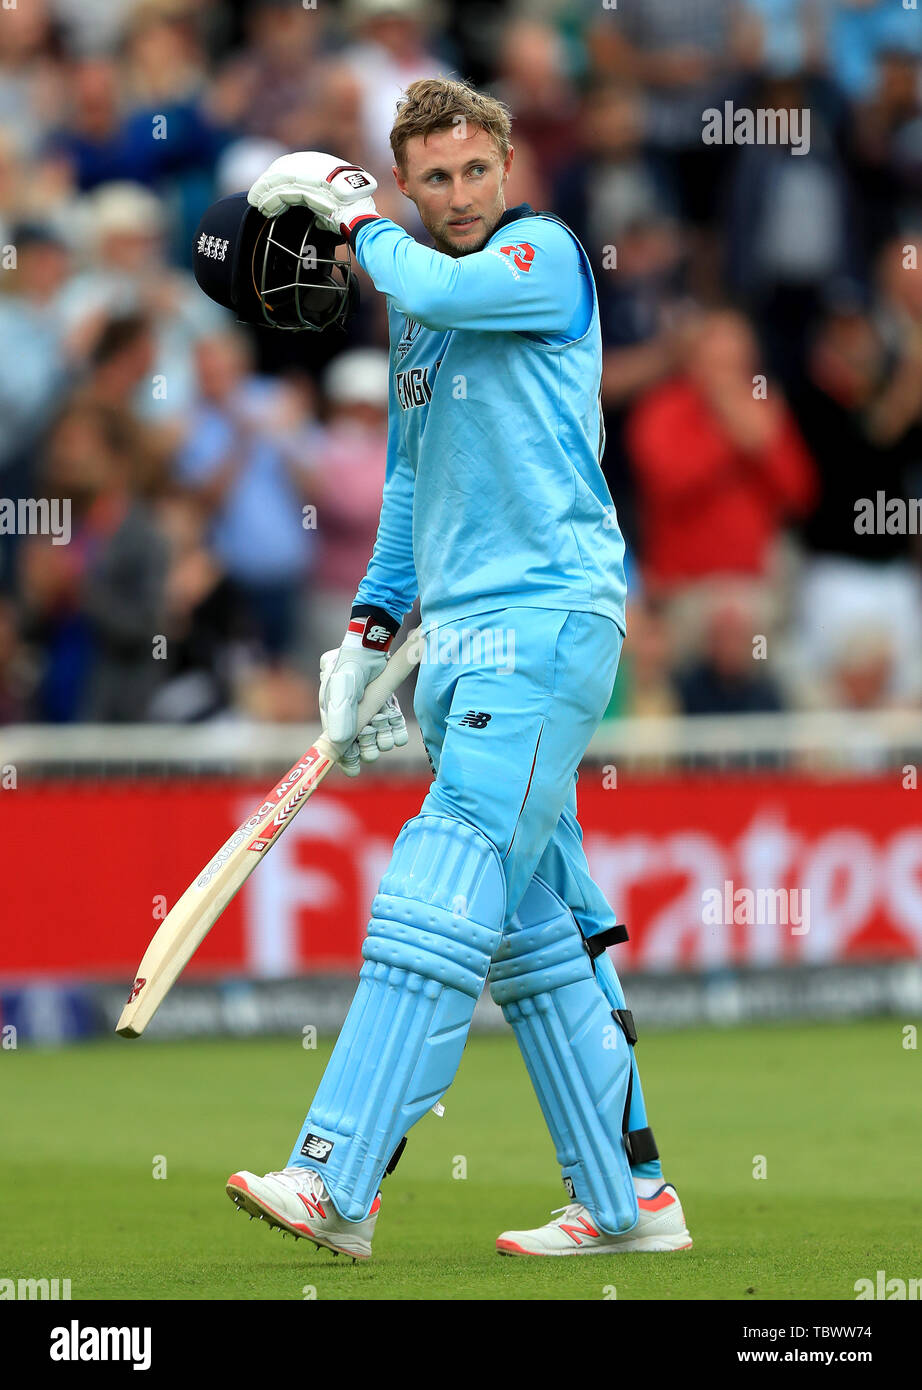 England's Joe Root appears dejected after being dismissed during the ICC Cricket World Cup group stage match at Trent Bridge, Nottingham. Stock Photo